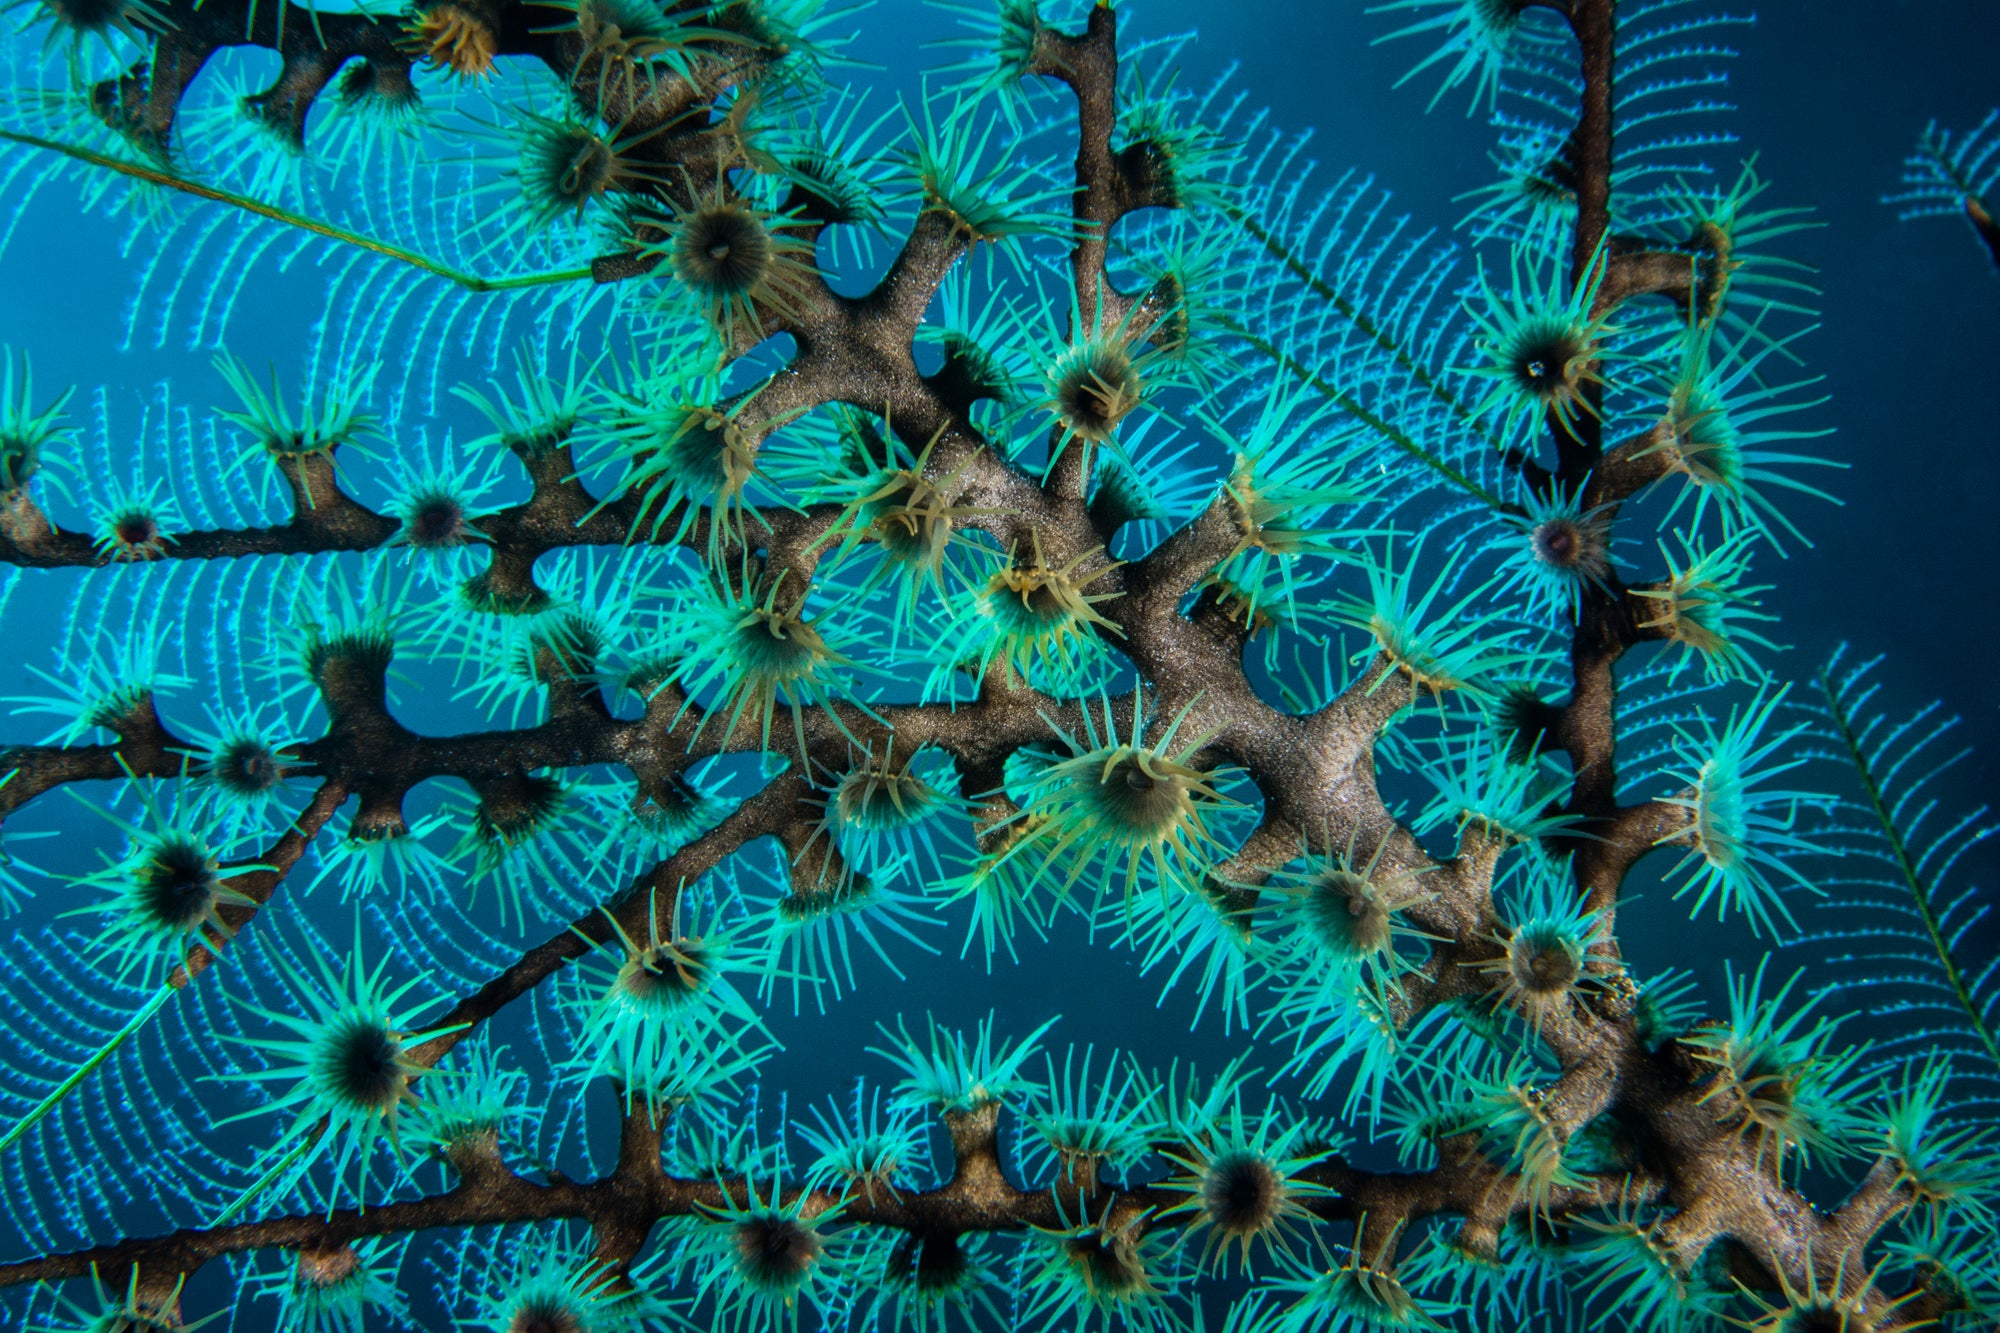 Mesophotic Coral Ecosystems (photo: Ally McDowell)